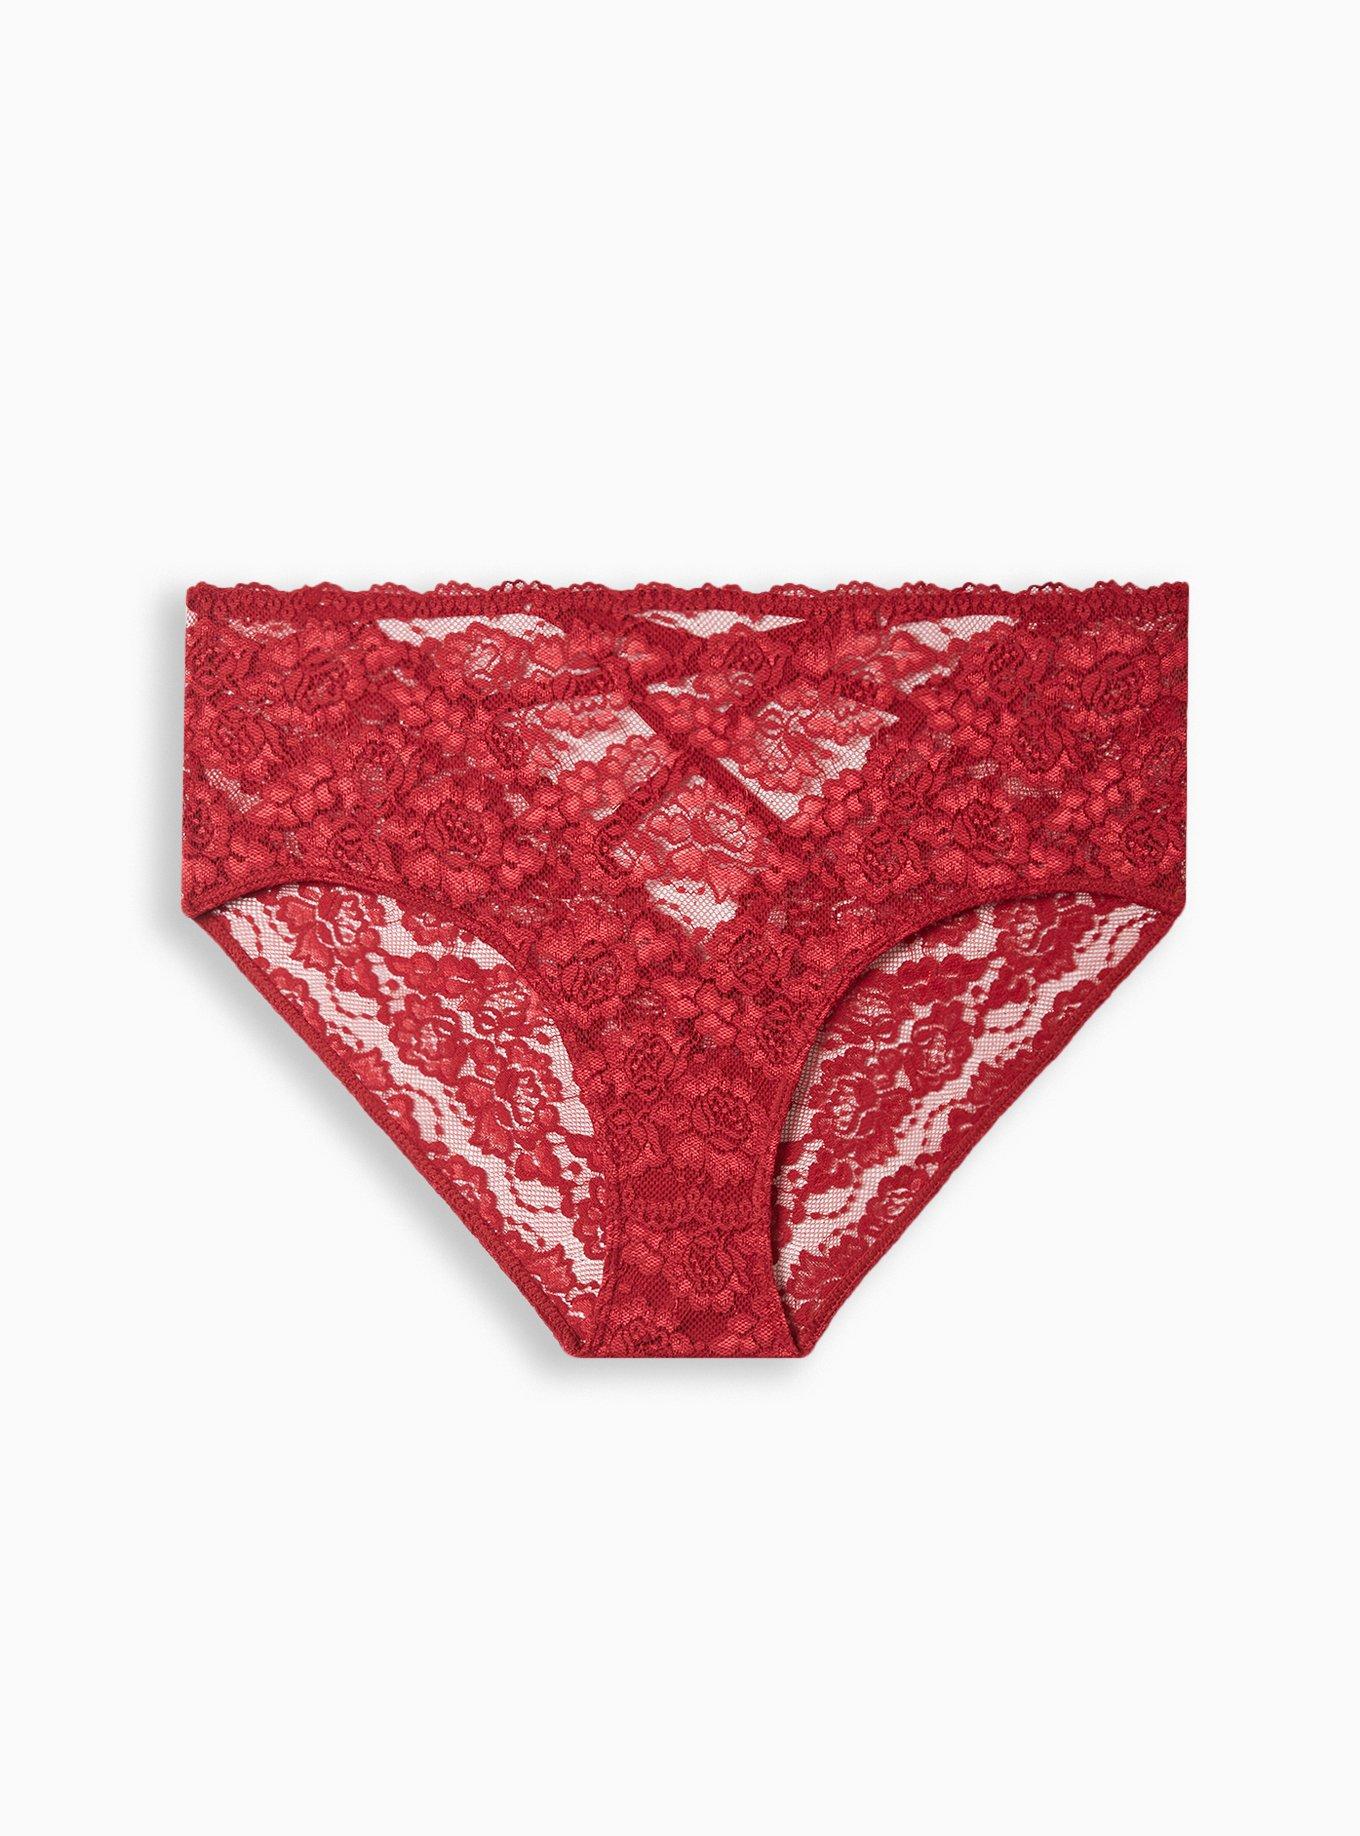 Lace Knickers Red Lace Knickers Gift for Her French Lingerie Birthday Gift  Lace Panties Lace Underwear Lace Valentine Gift Sheer Knickers -  UK